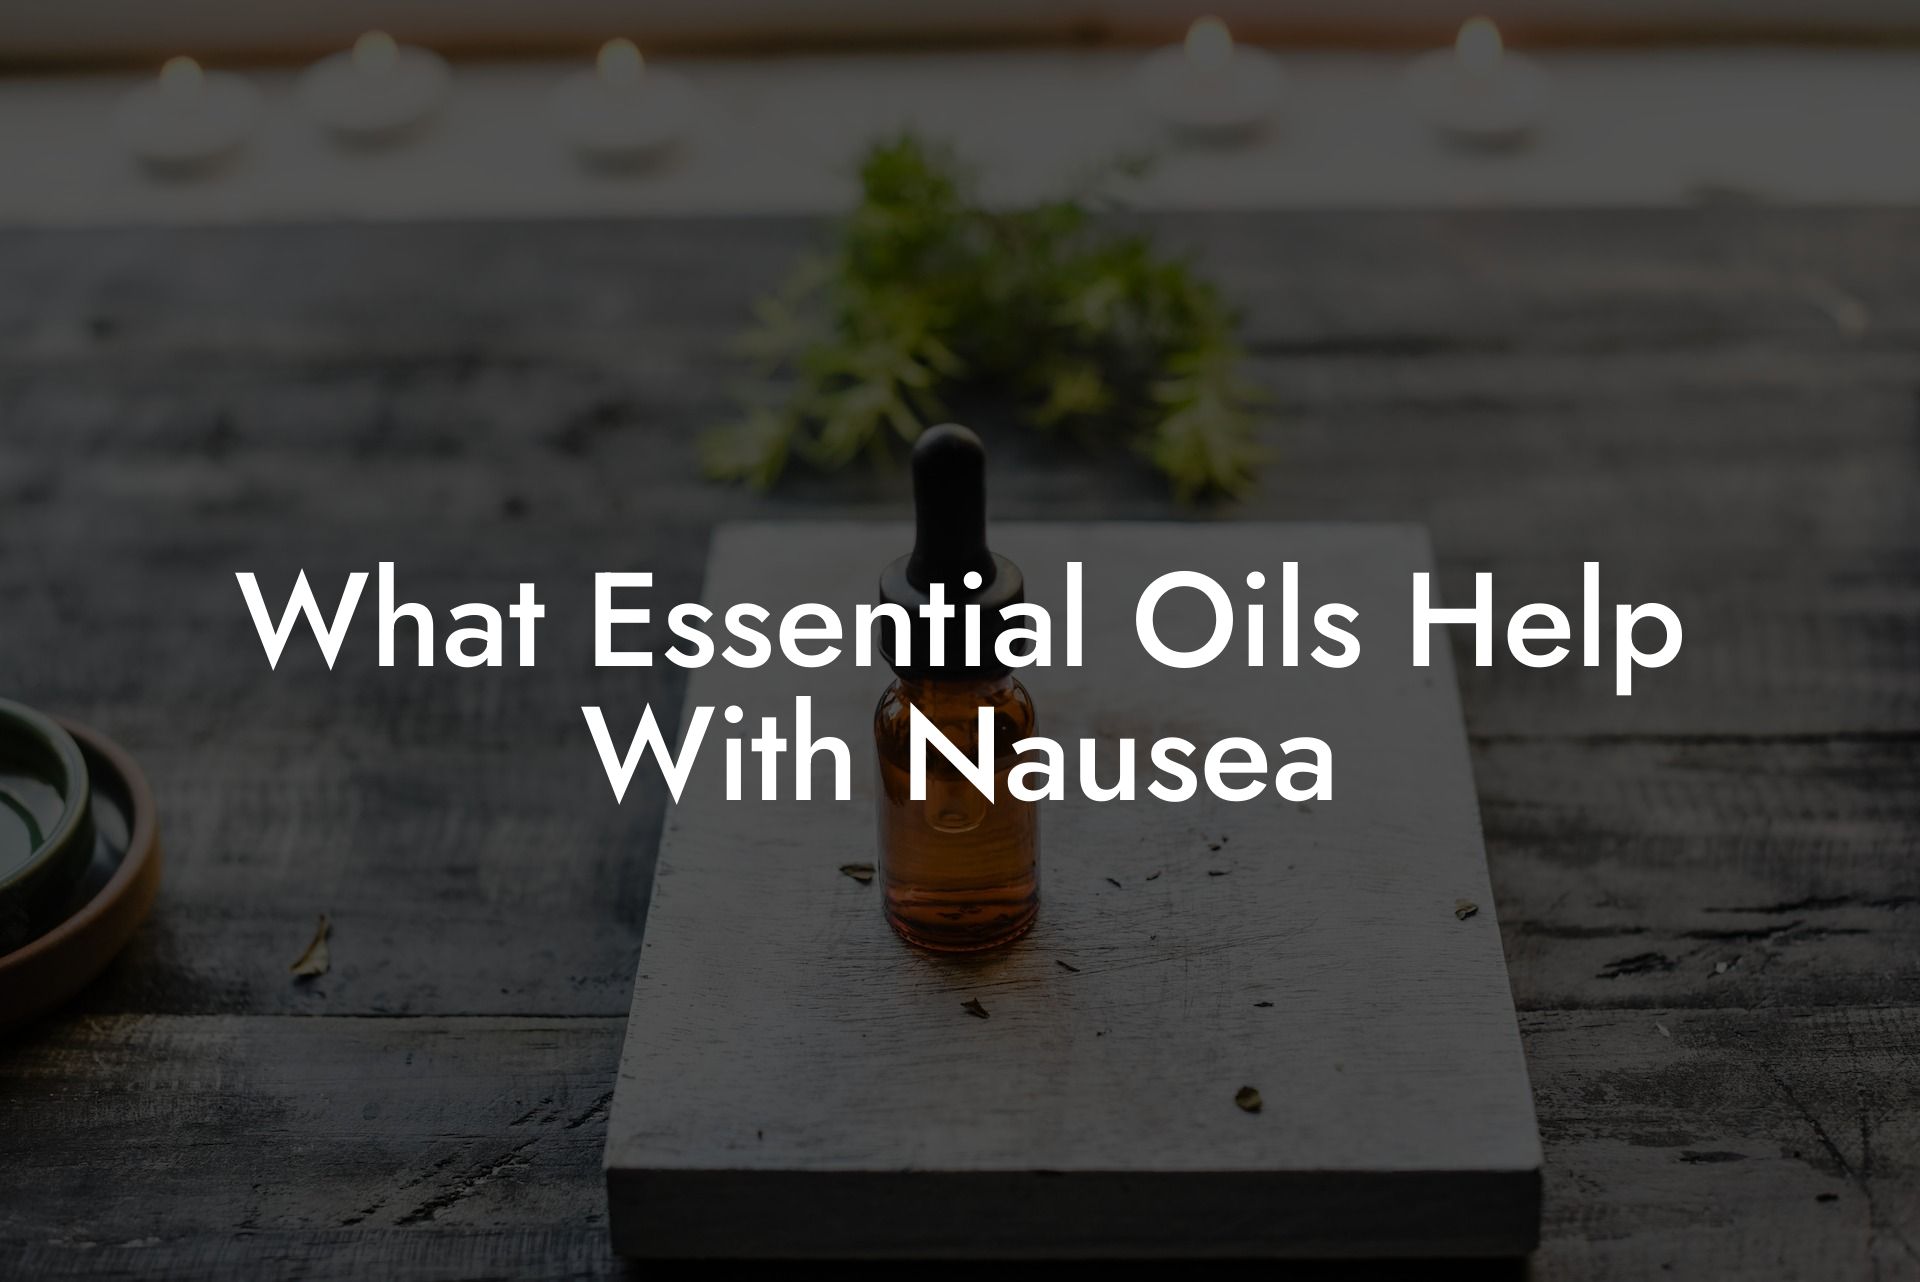 What Essential Oils Help With Nausea